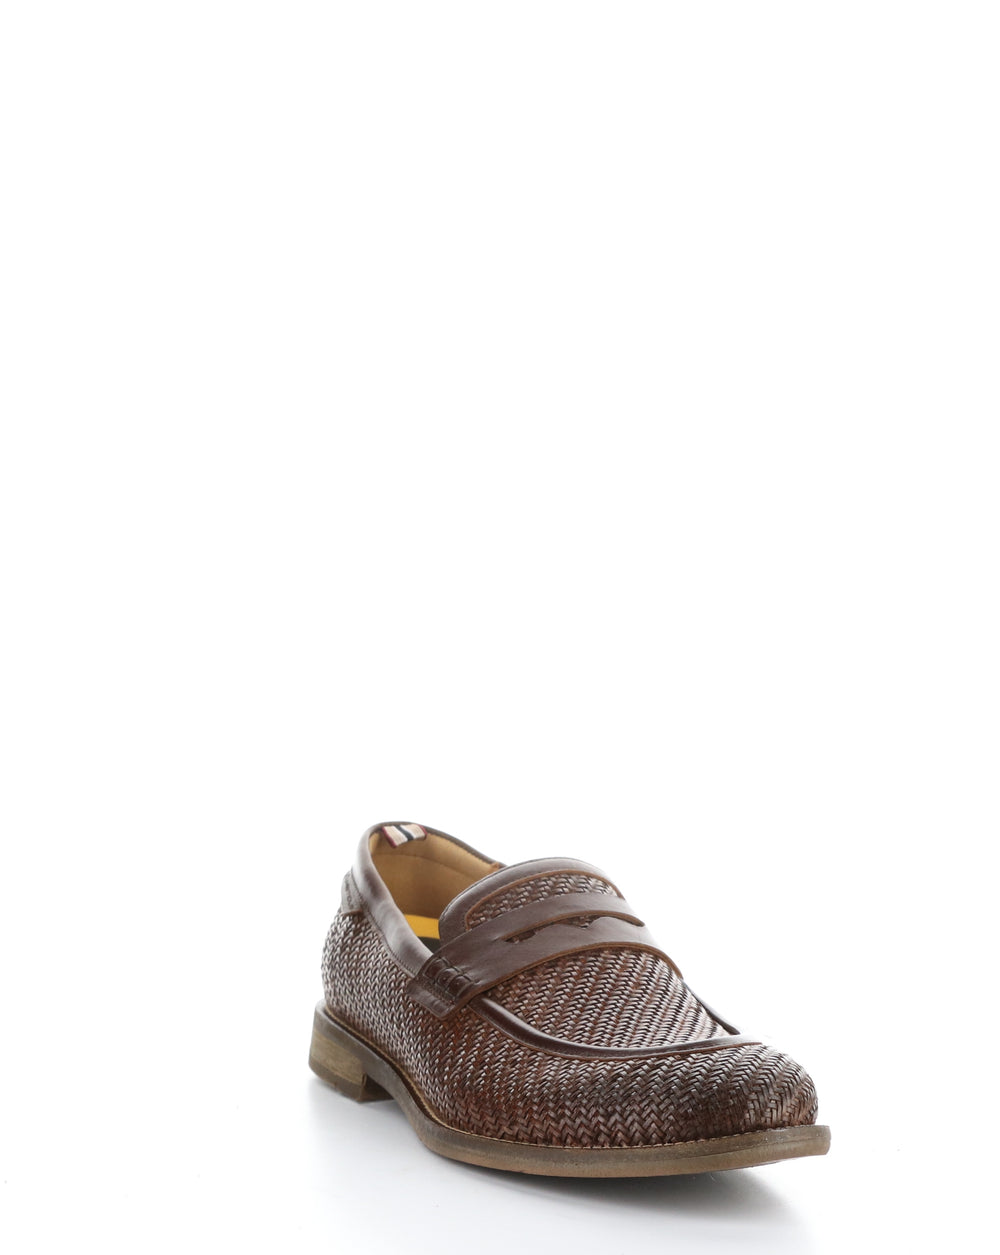 13479 BROWN Round Toe Shoes